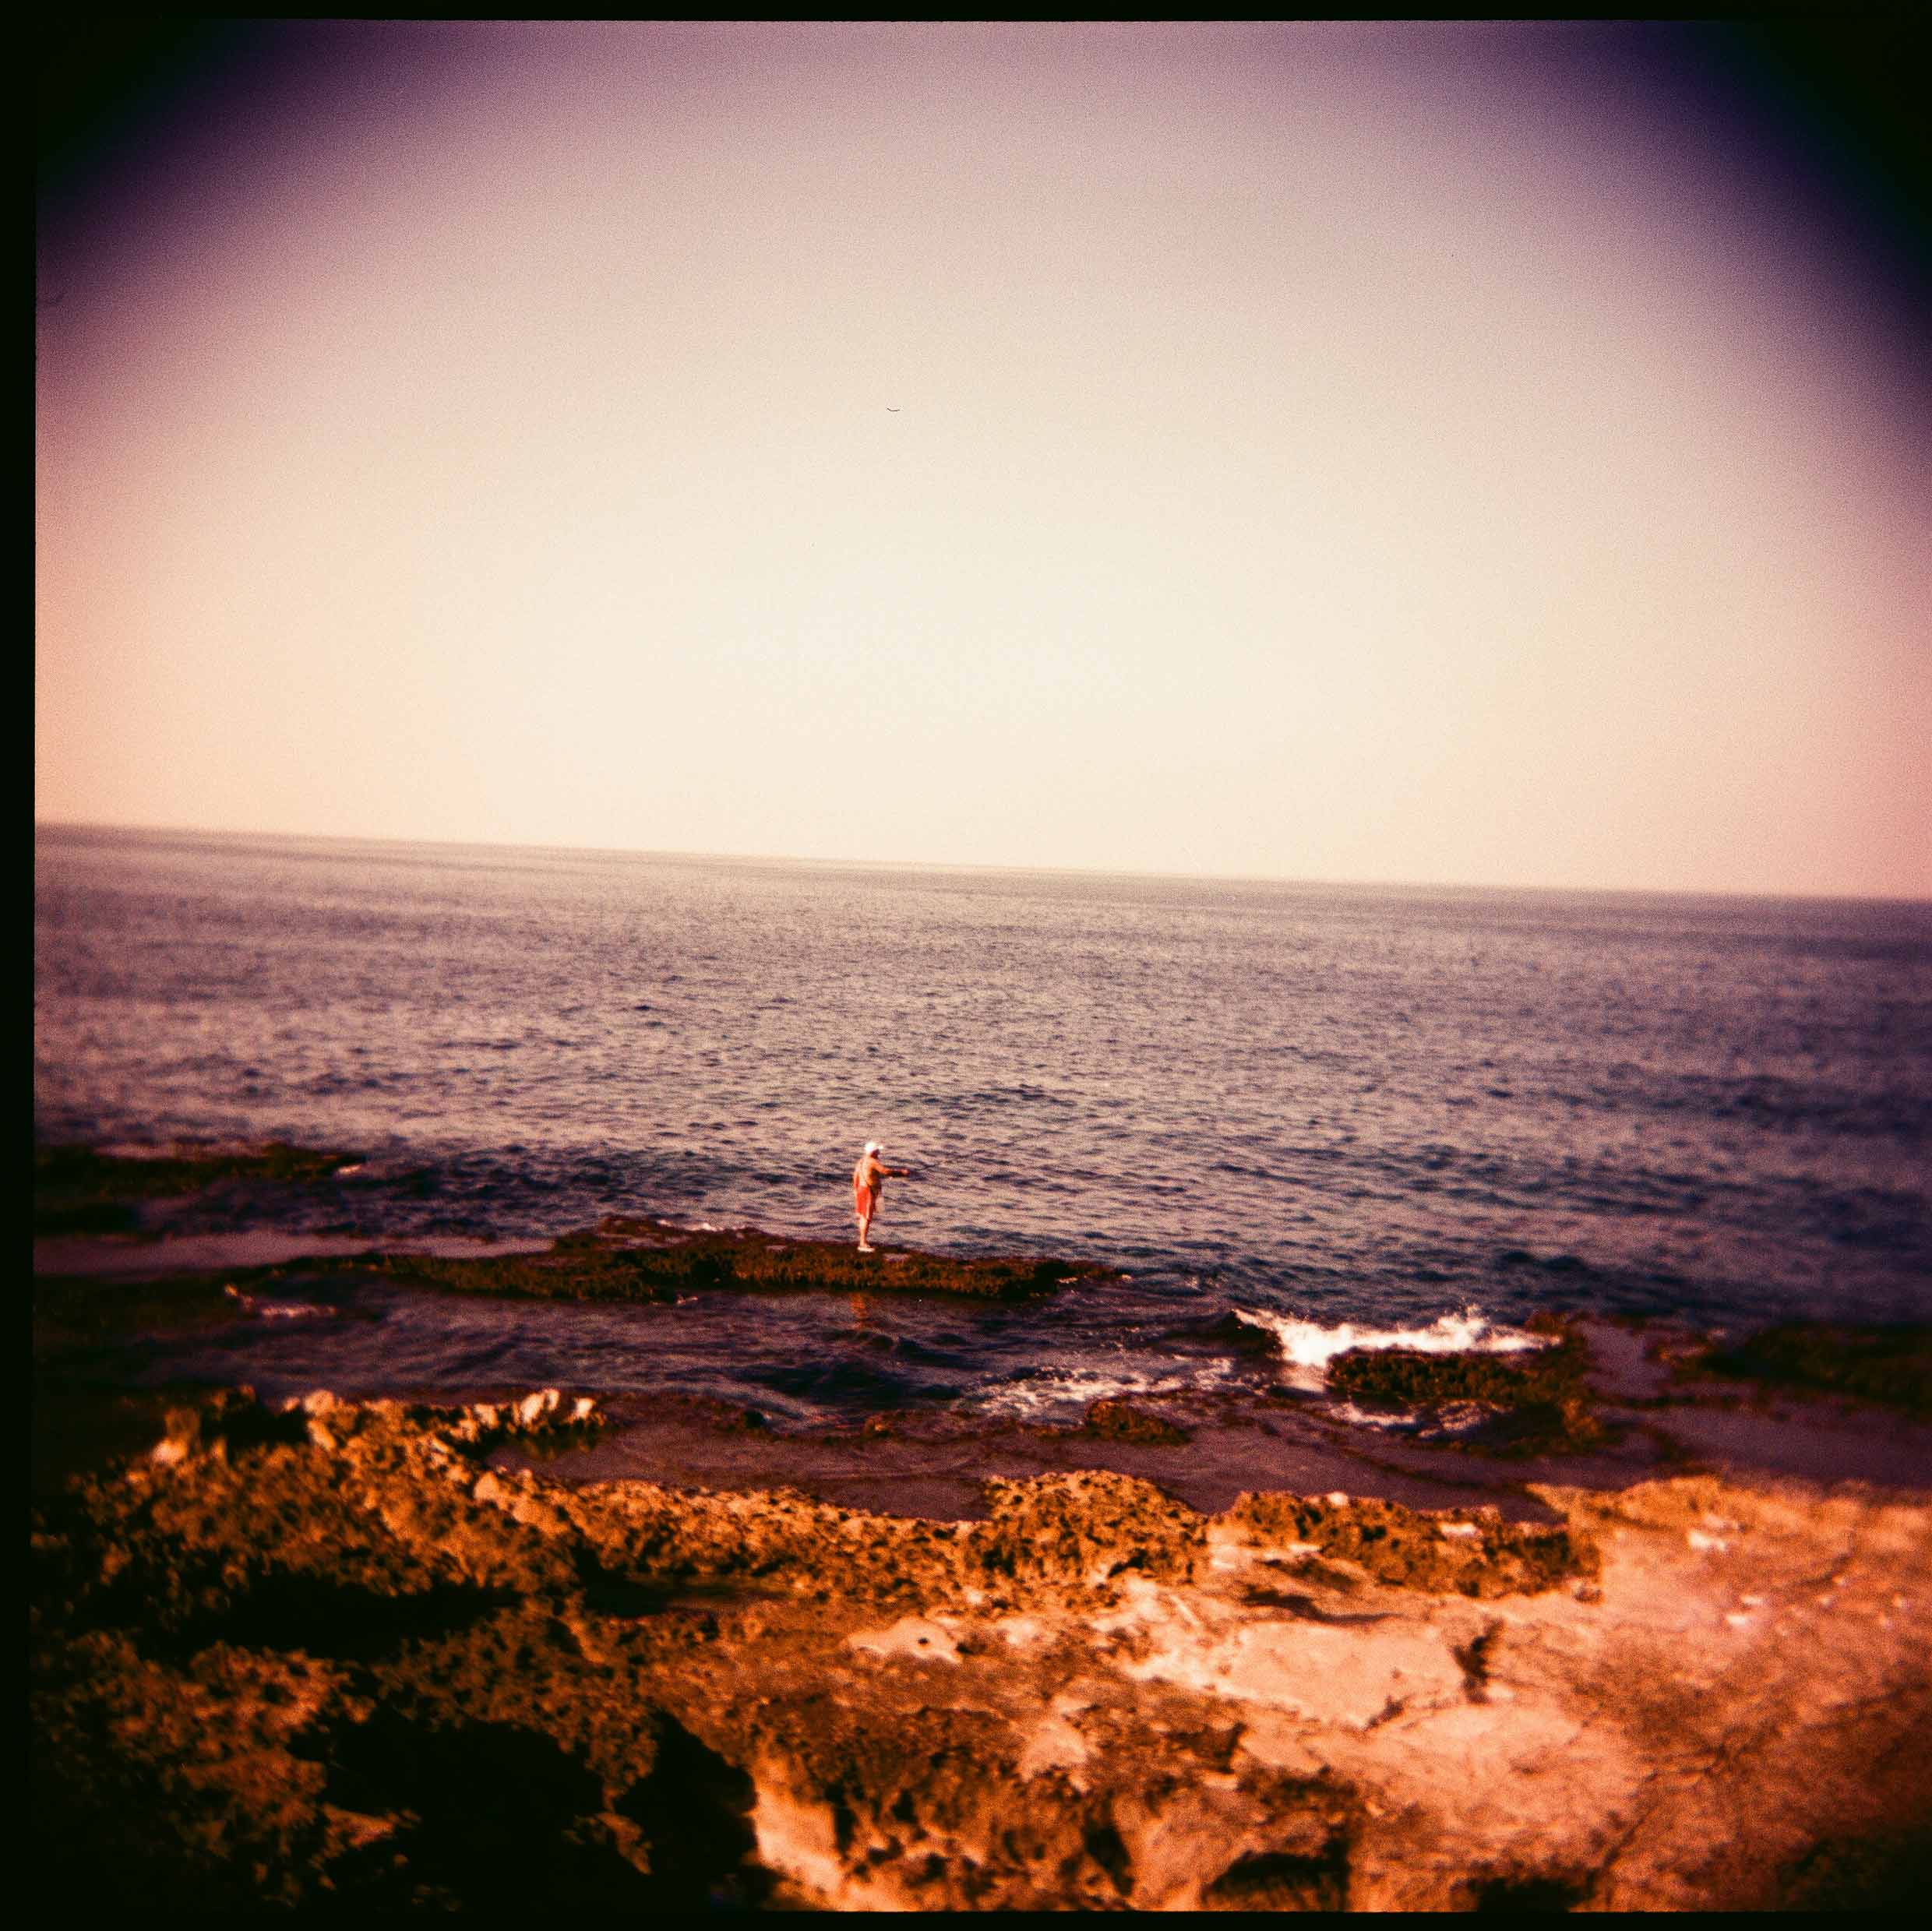 Photo tinted blue-yellow. Foreground: A rocky shore under a pale sky is covered with flora, then a narrow stretch of beach. A person wearing shorts, t shirt, and cap stands on a narrow sandbar; in the distance, the navy-blue water is calm. 